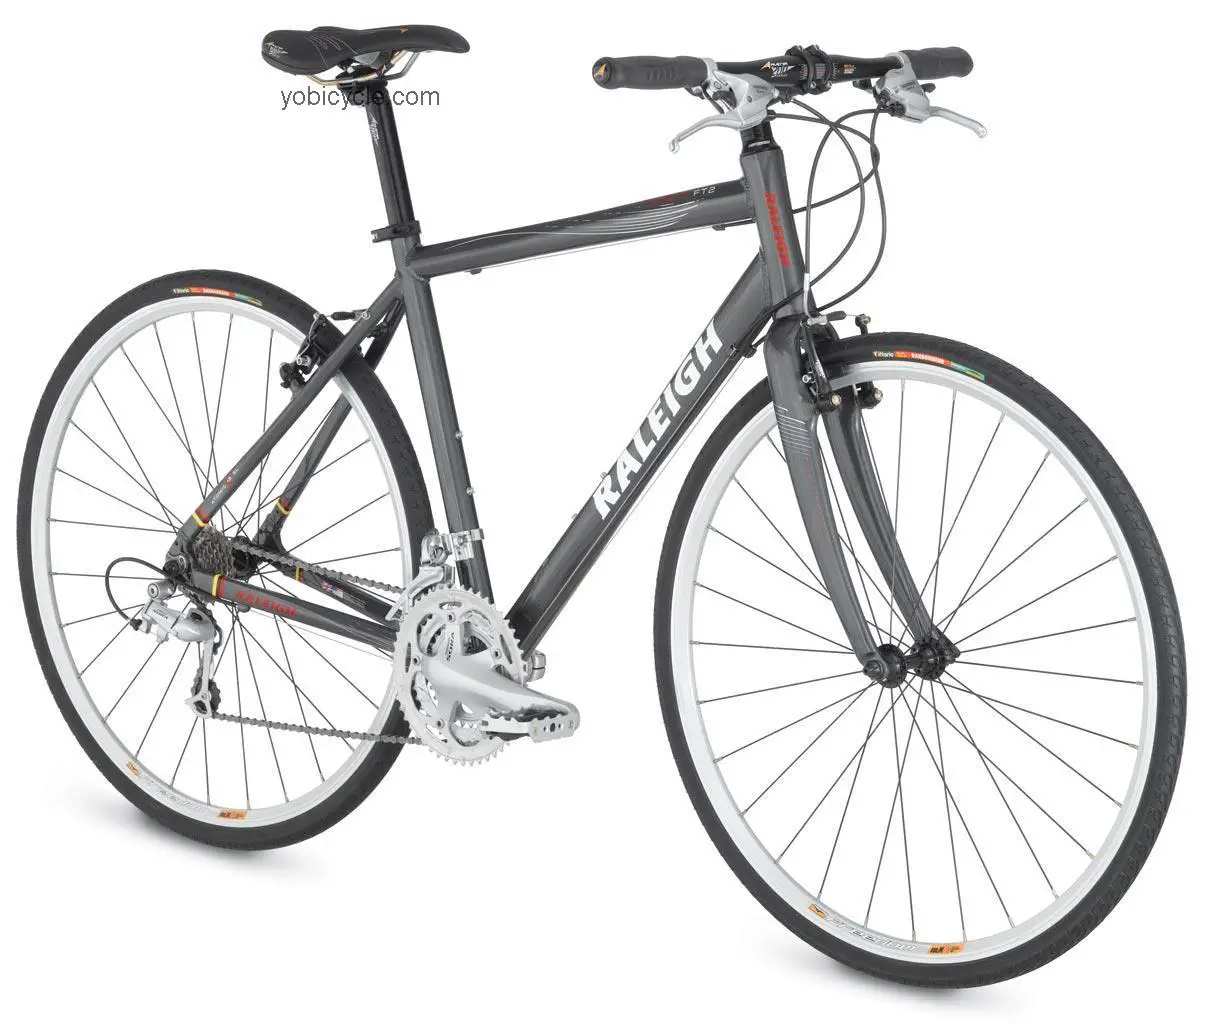 Raleigh  Cadent FT2 Technical data and specifications